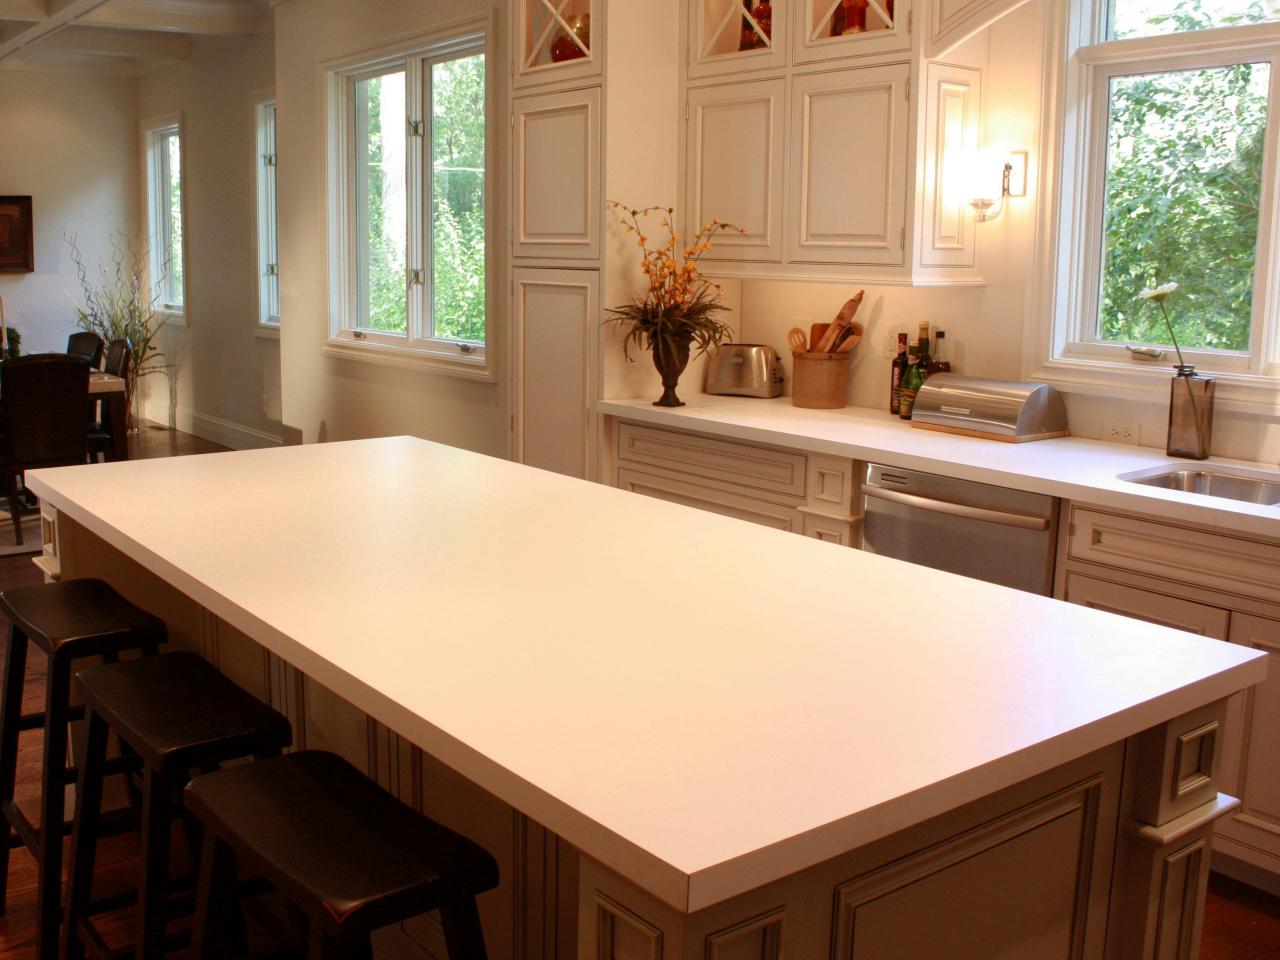 Paint Laminate Kitchen Countertops Diy, How To Paint Faux Wood Countertops